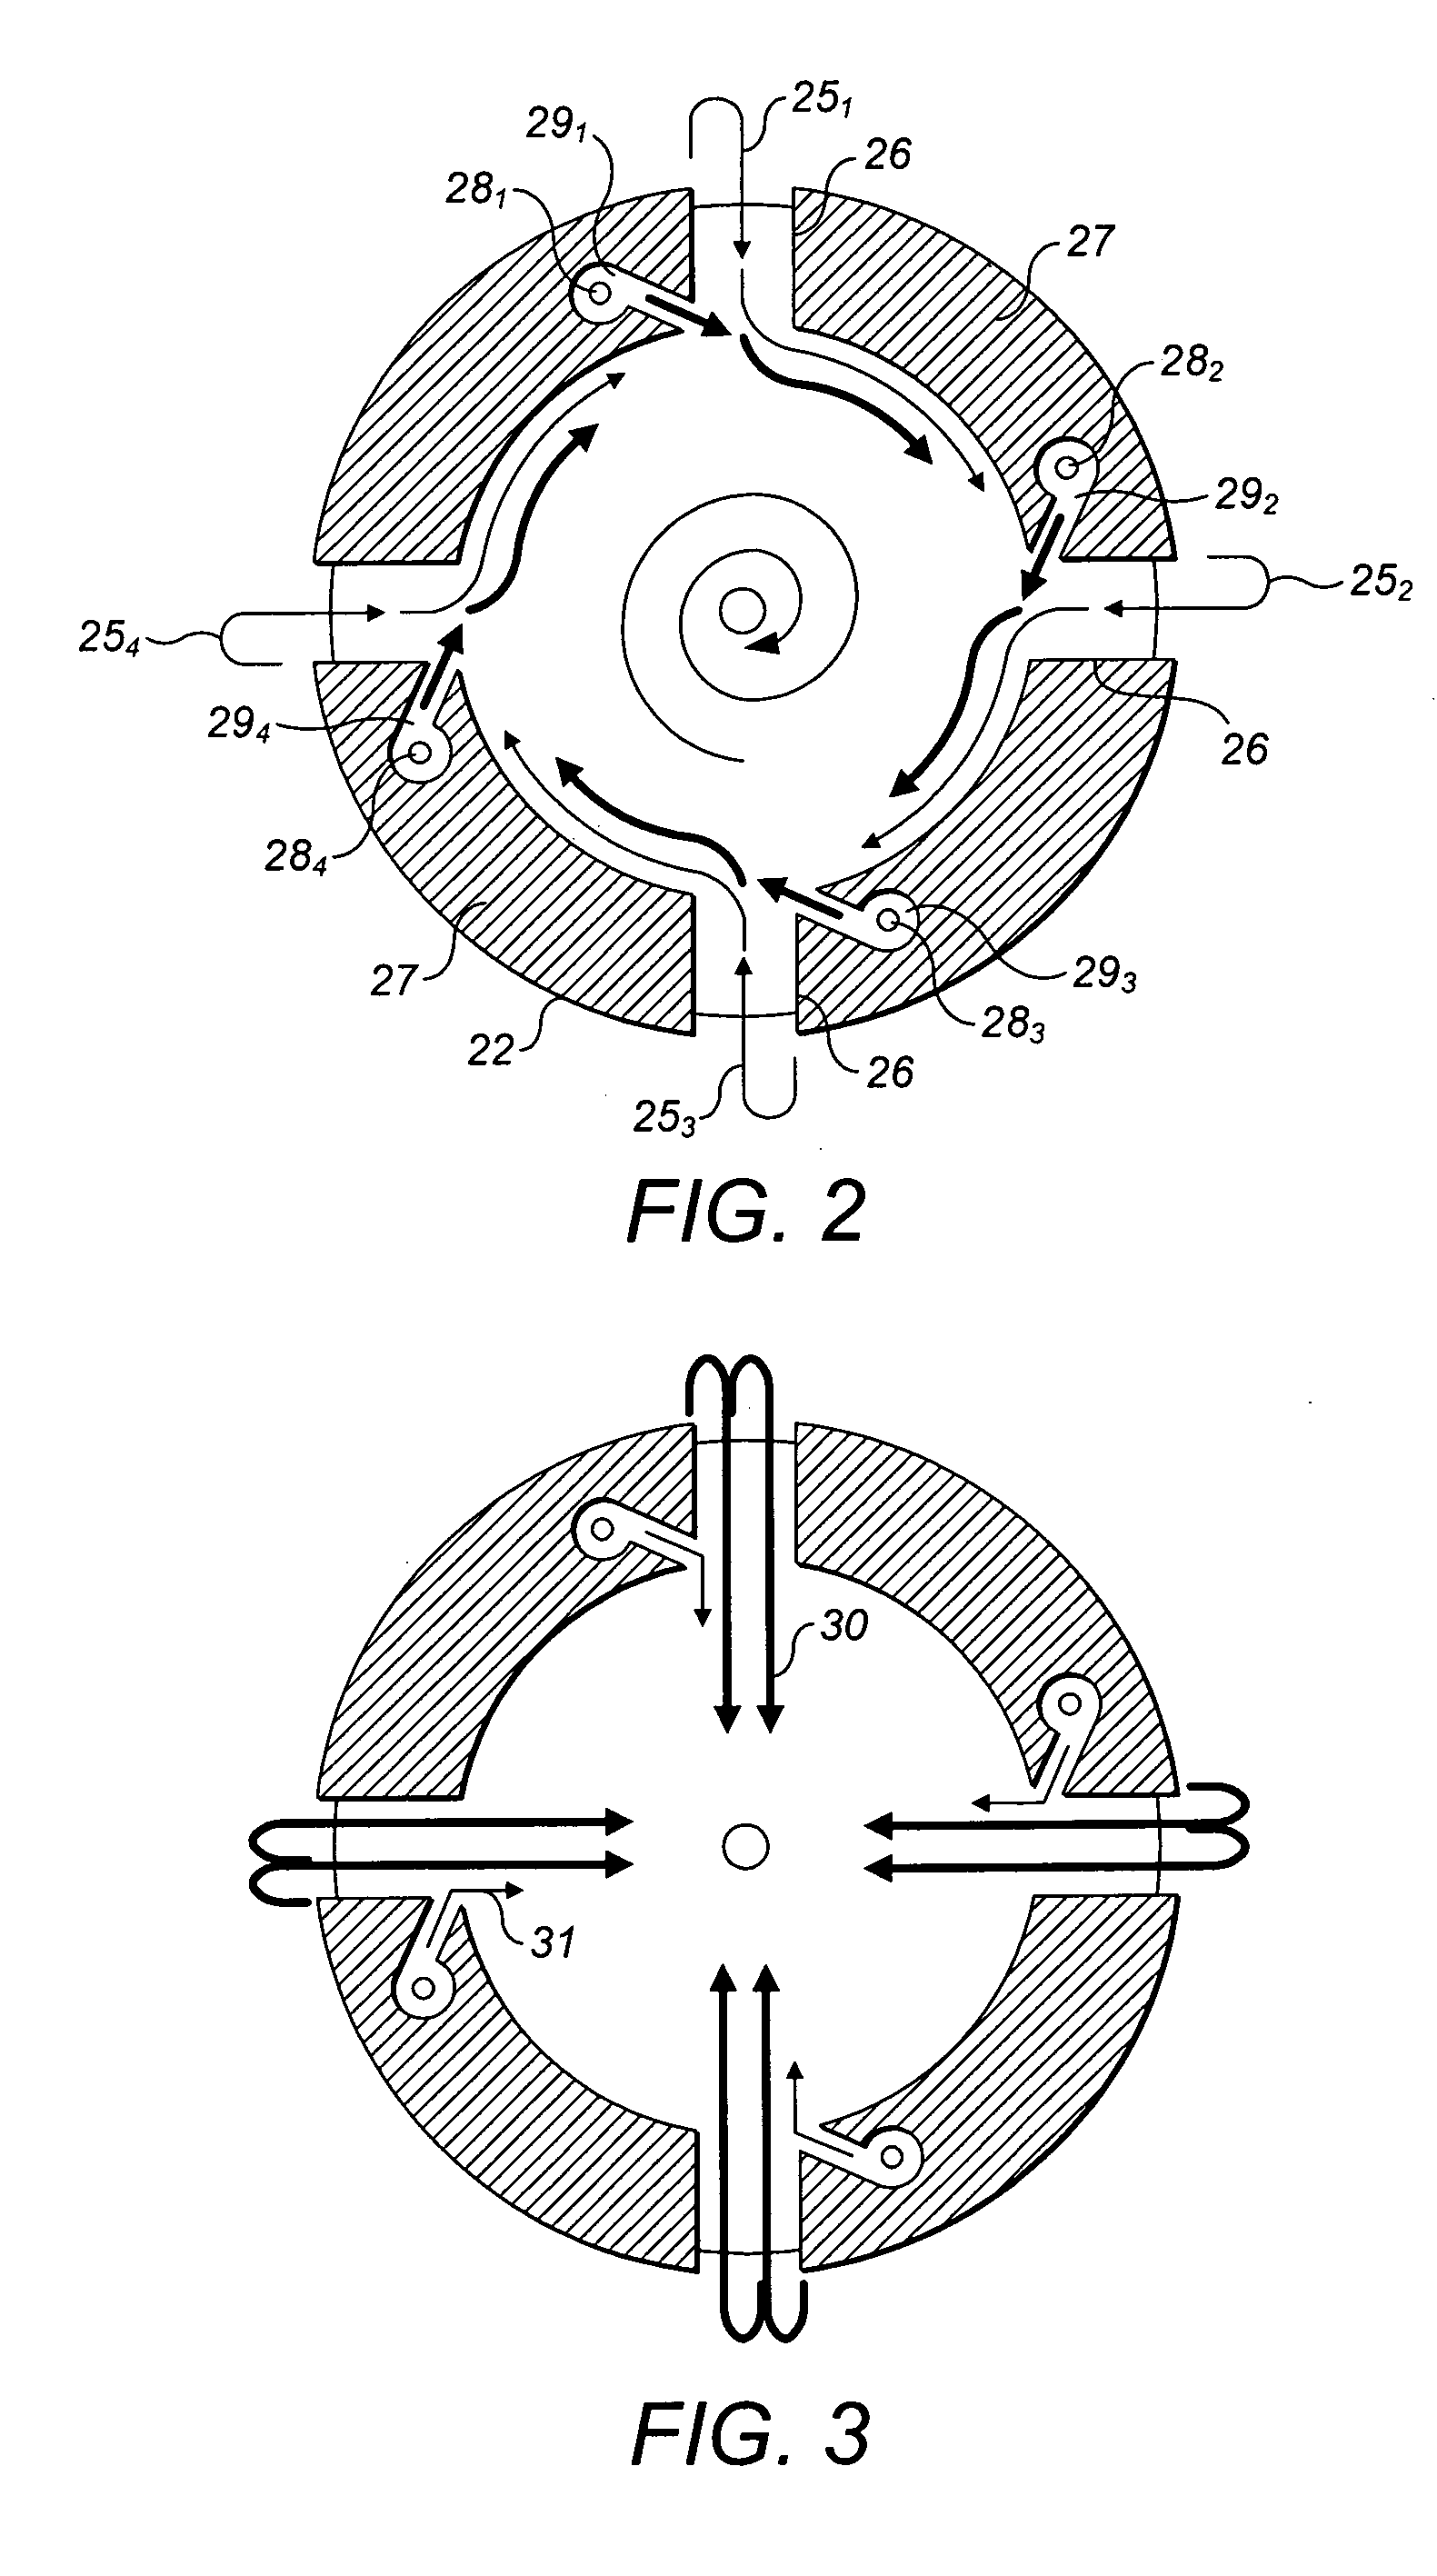 Apparatus and method for controlling the flow of fluid in a vortex amplifier